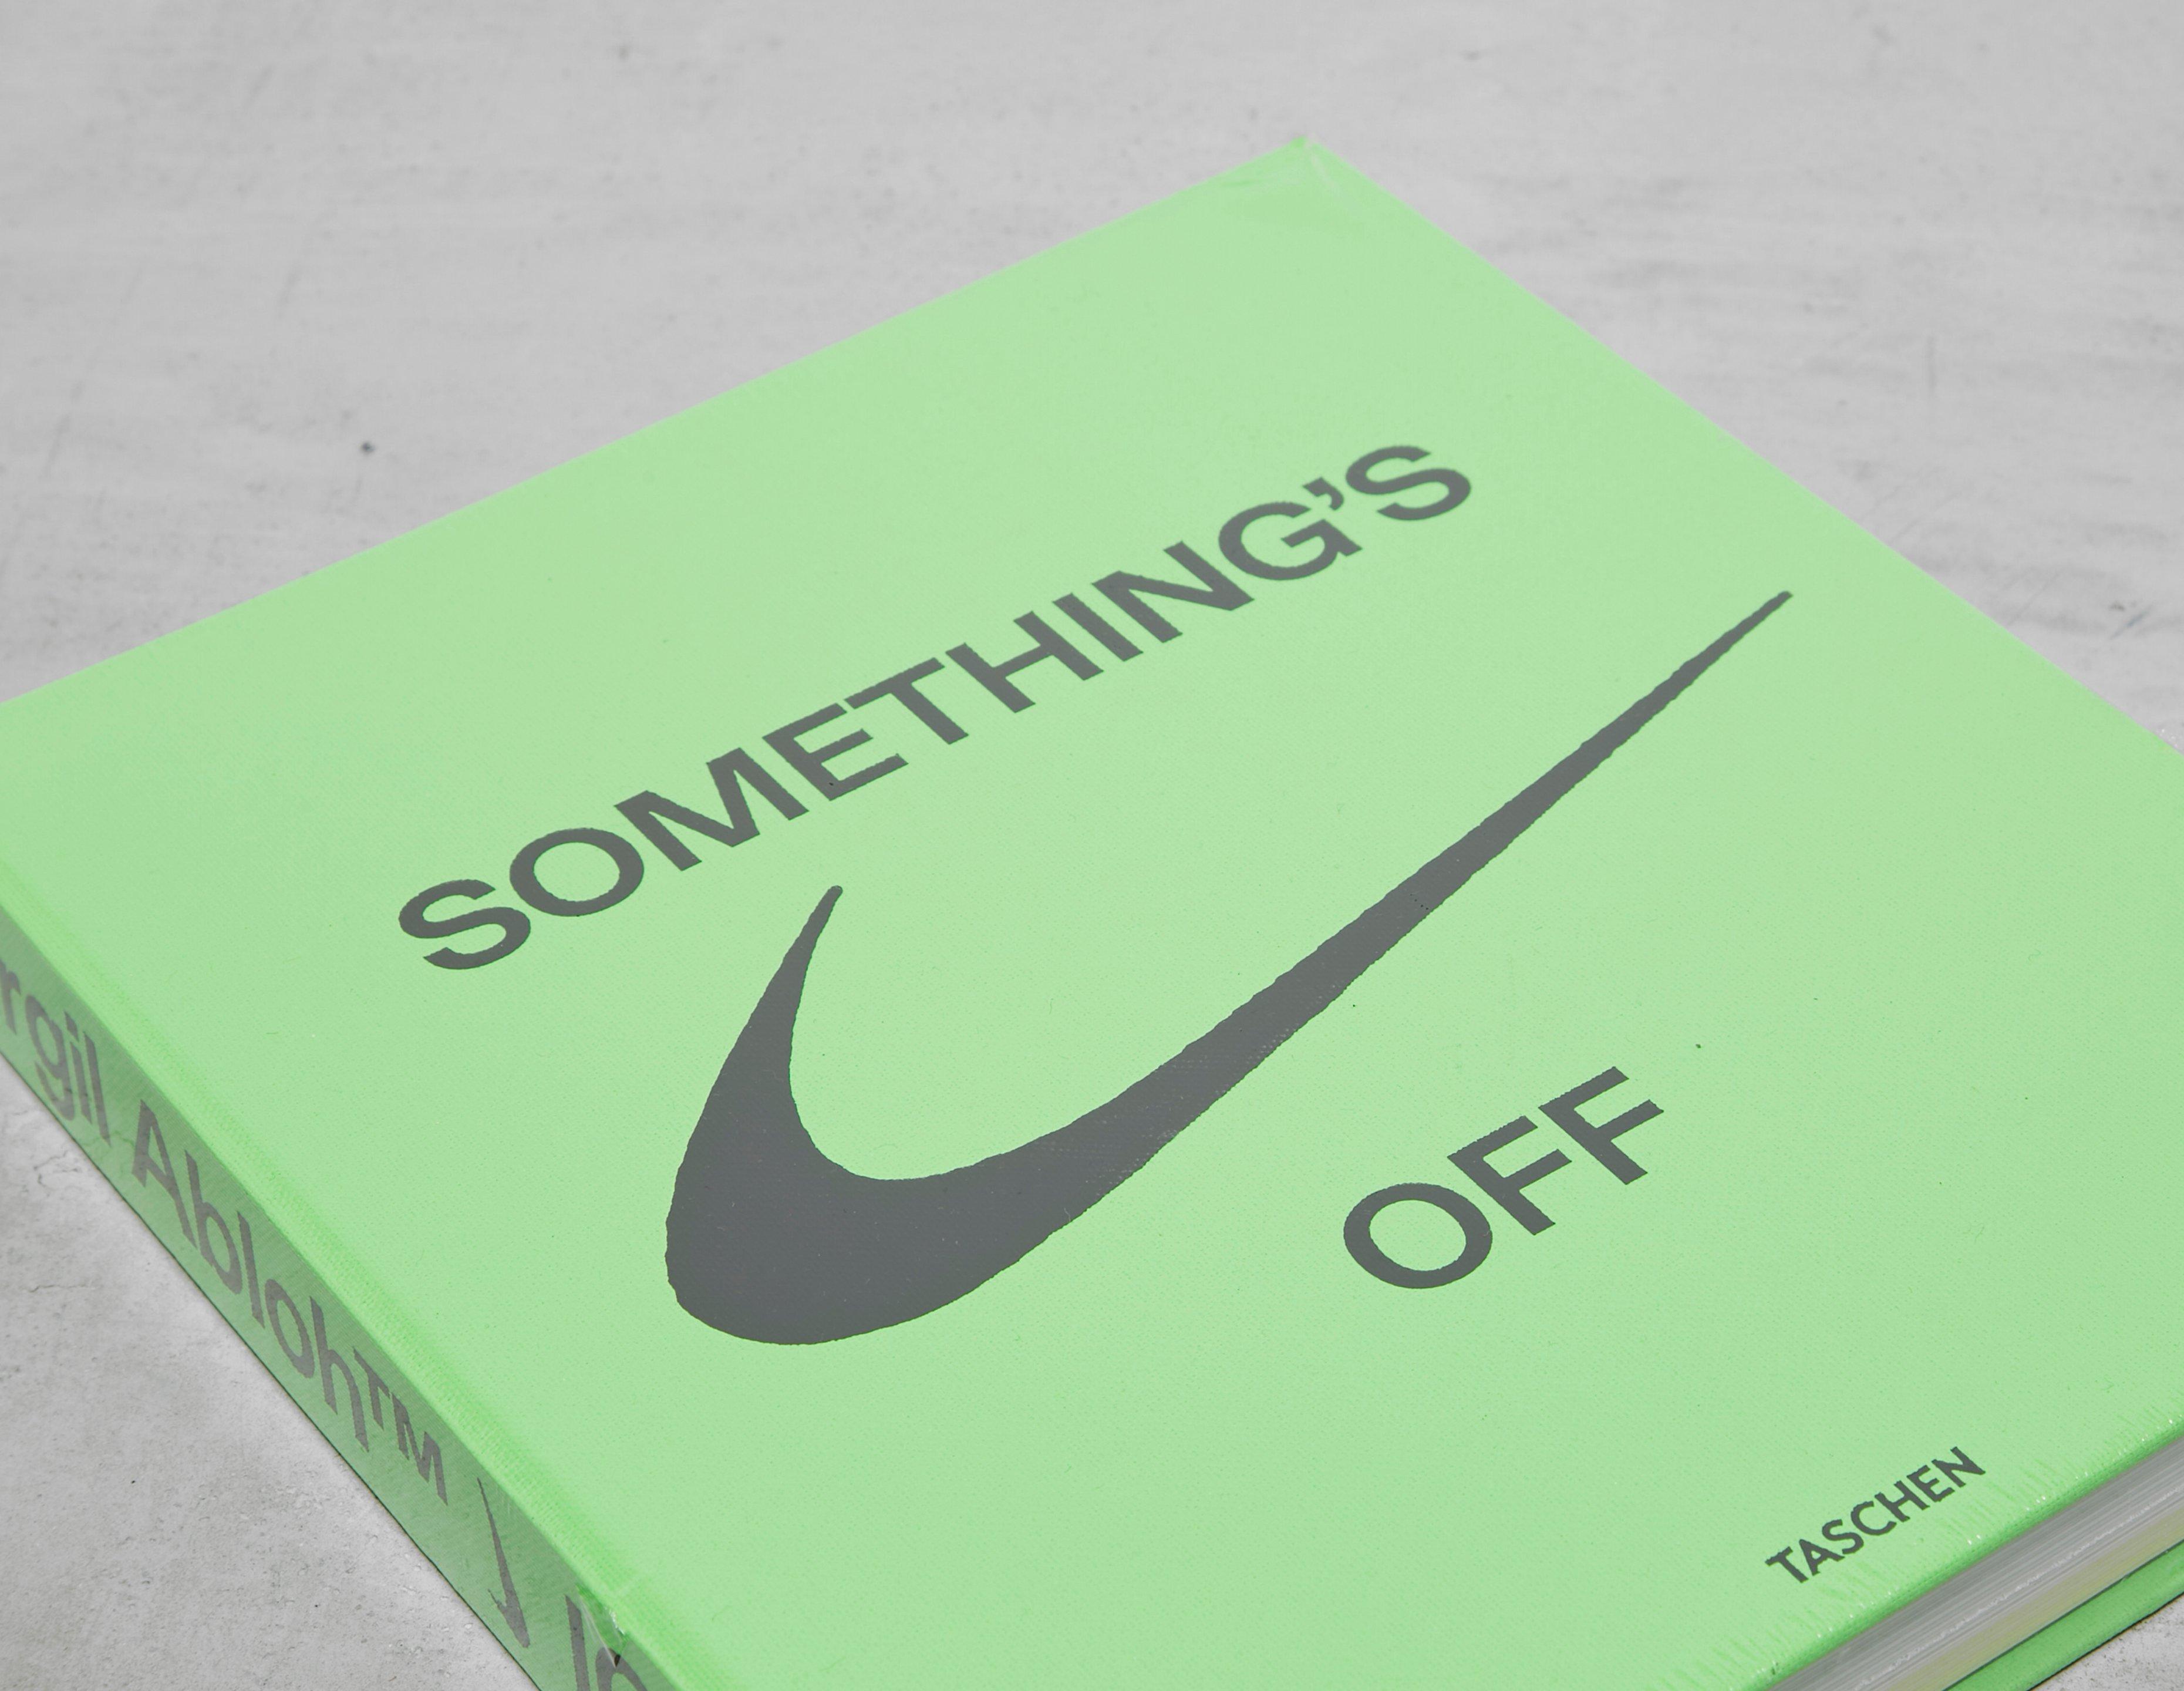 Abloh-isms: the book that collects Virgil Abloh's most